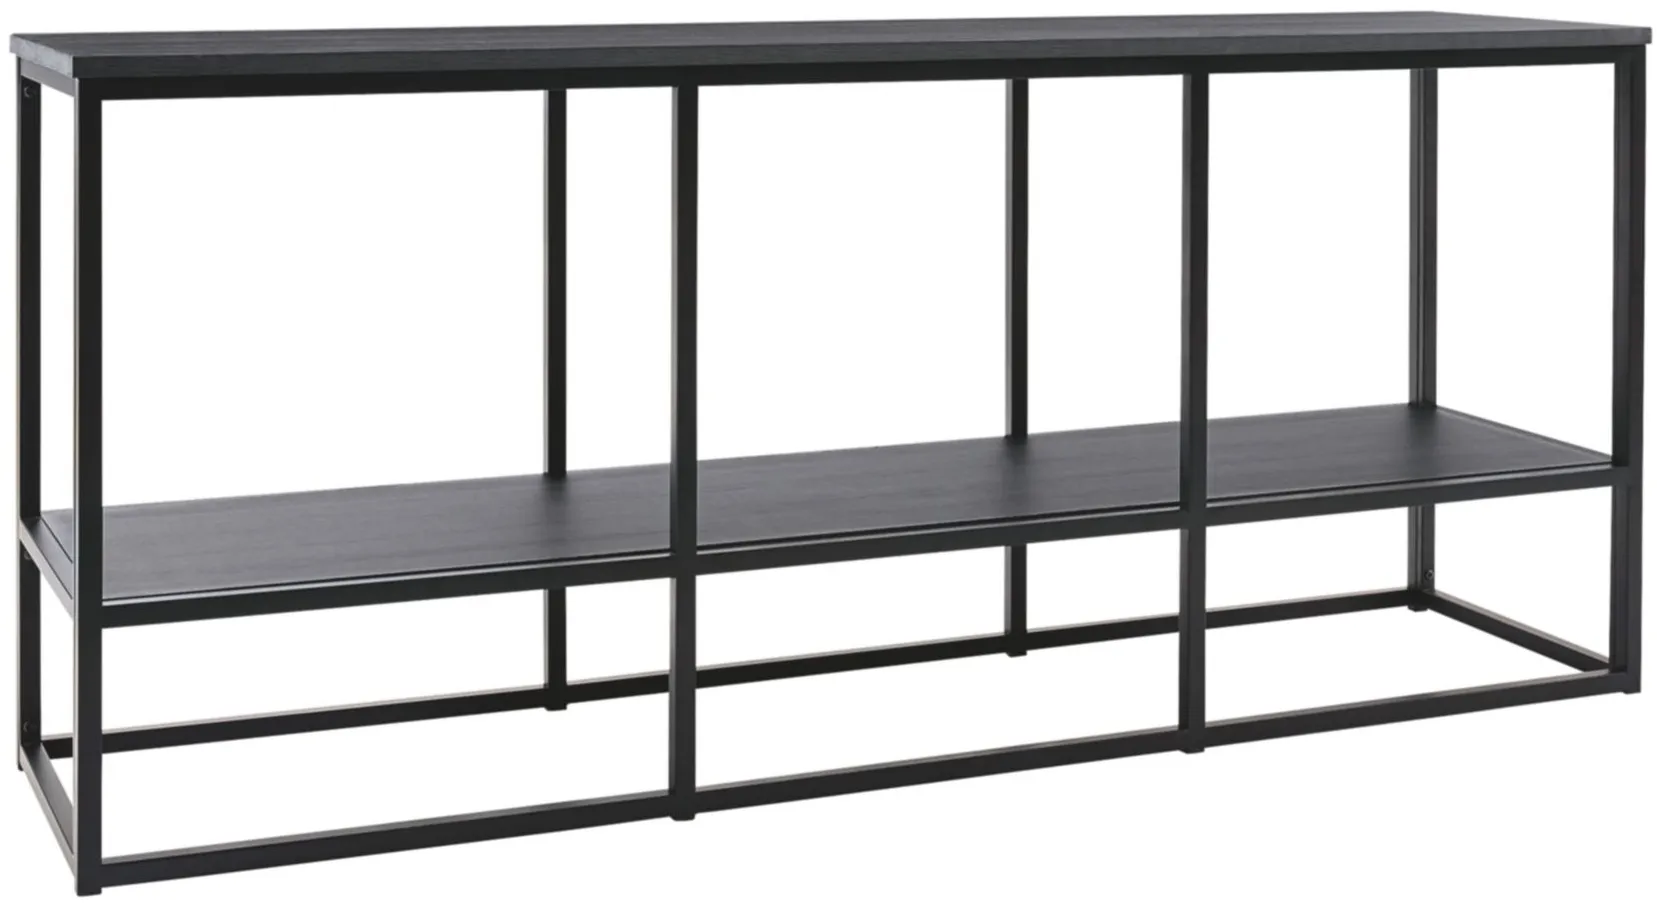 Yarlow TV Stand with Shelf in Black by Ashley Furniture